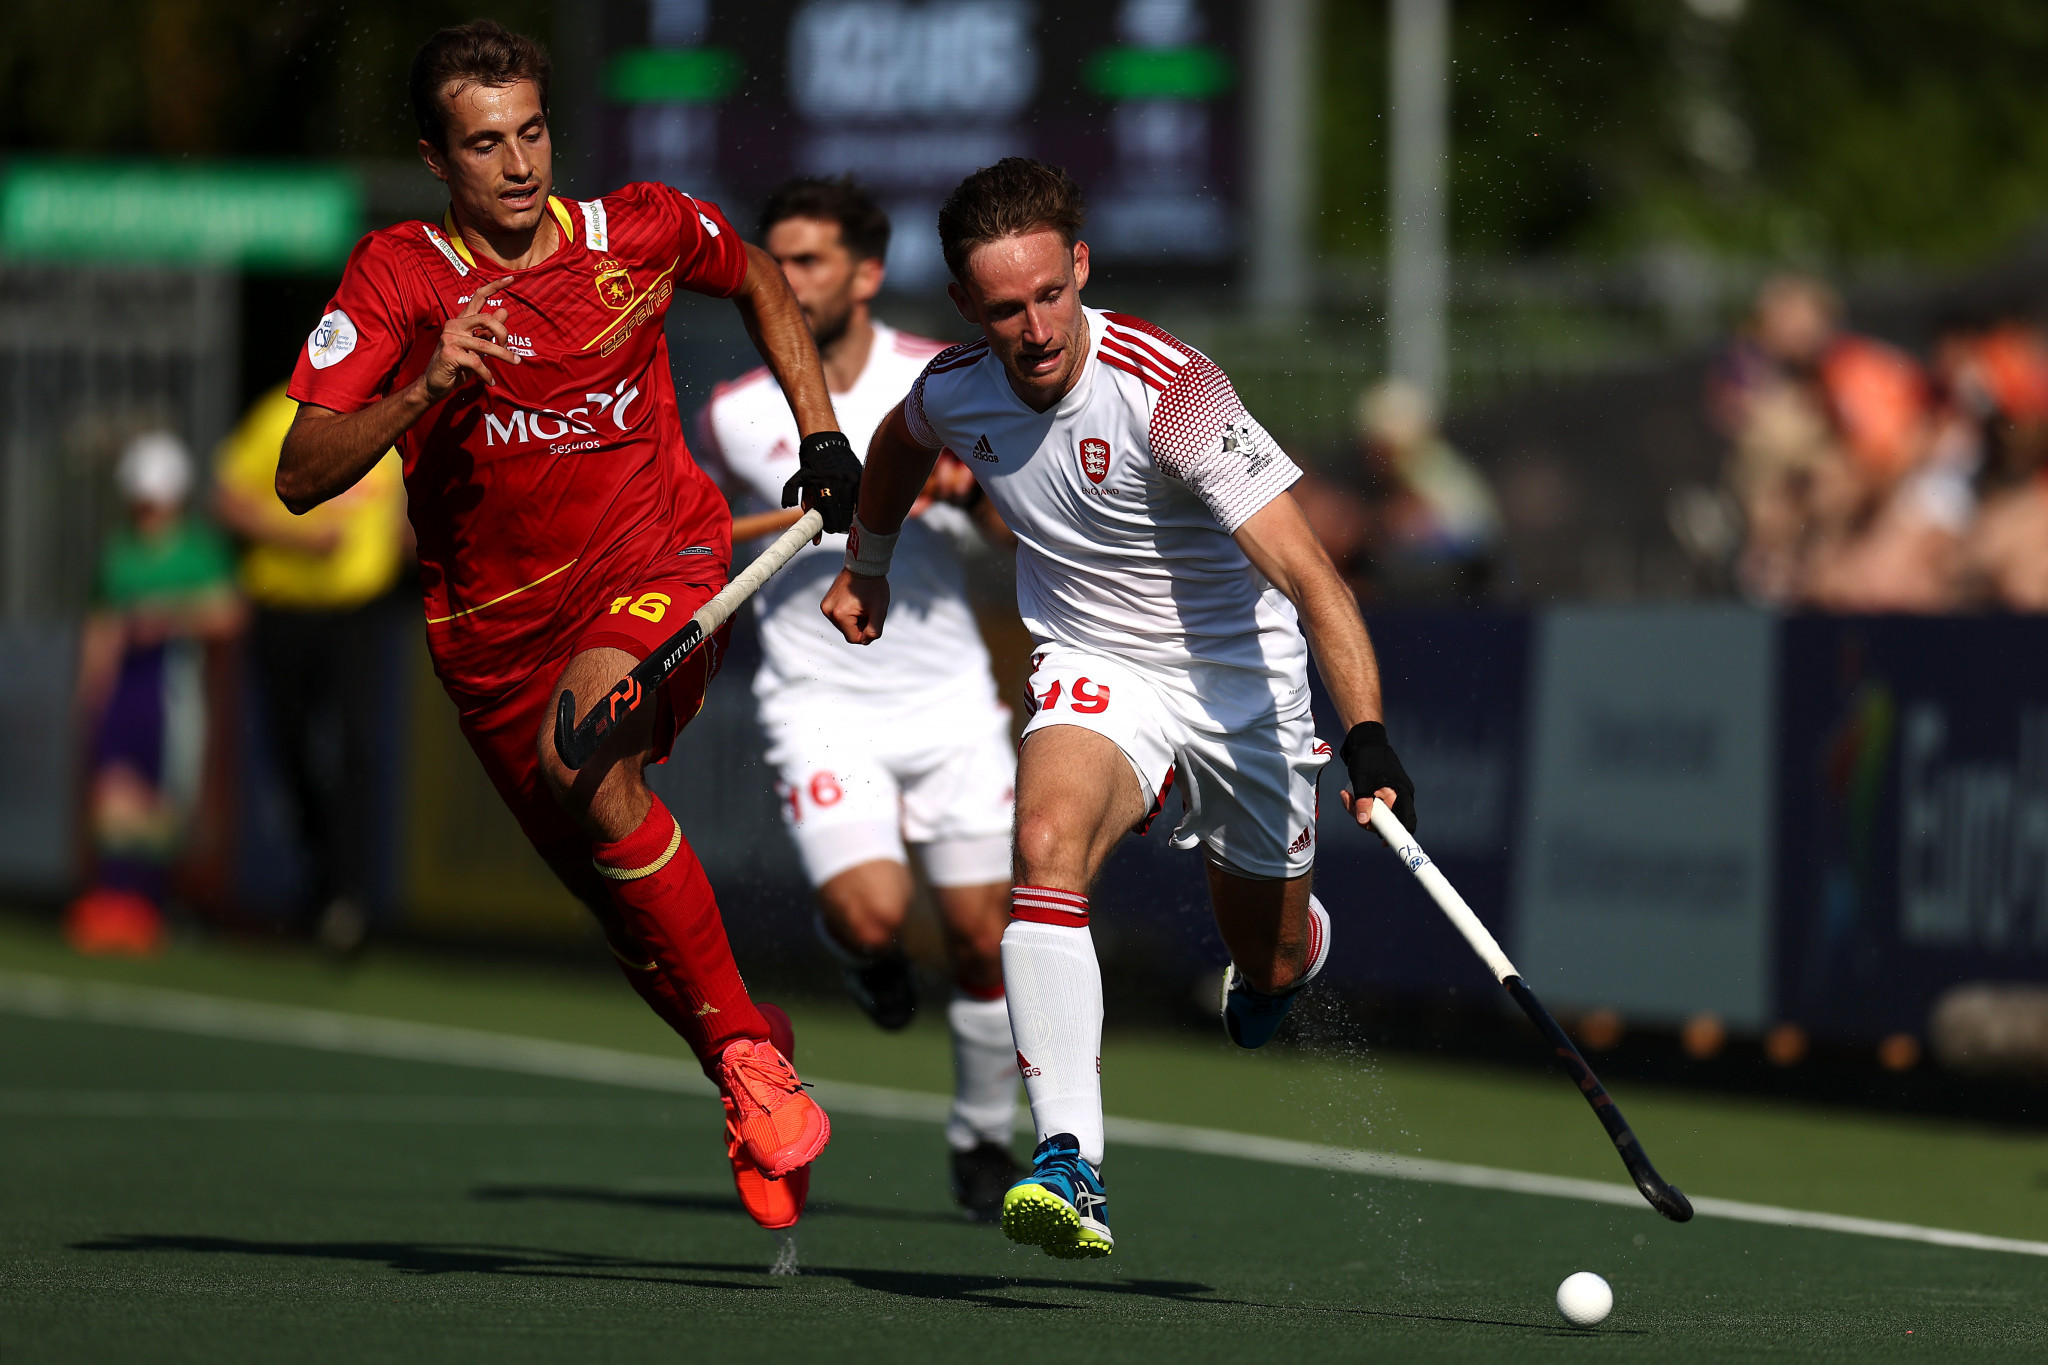 England and The Netherlands top pools as goals fly in at men’s EuroHockey Championship